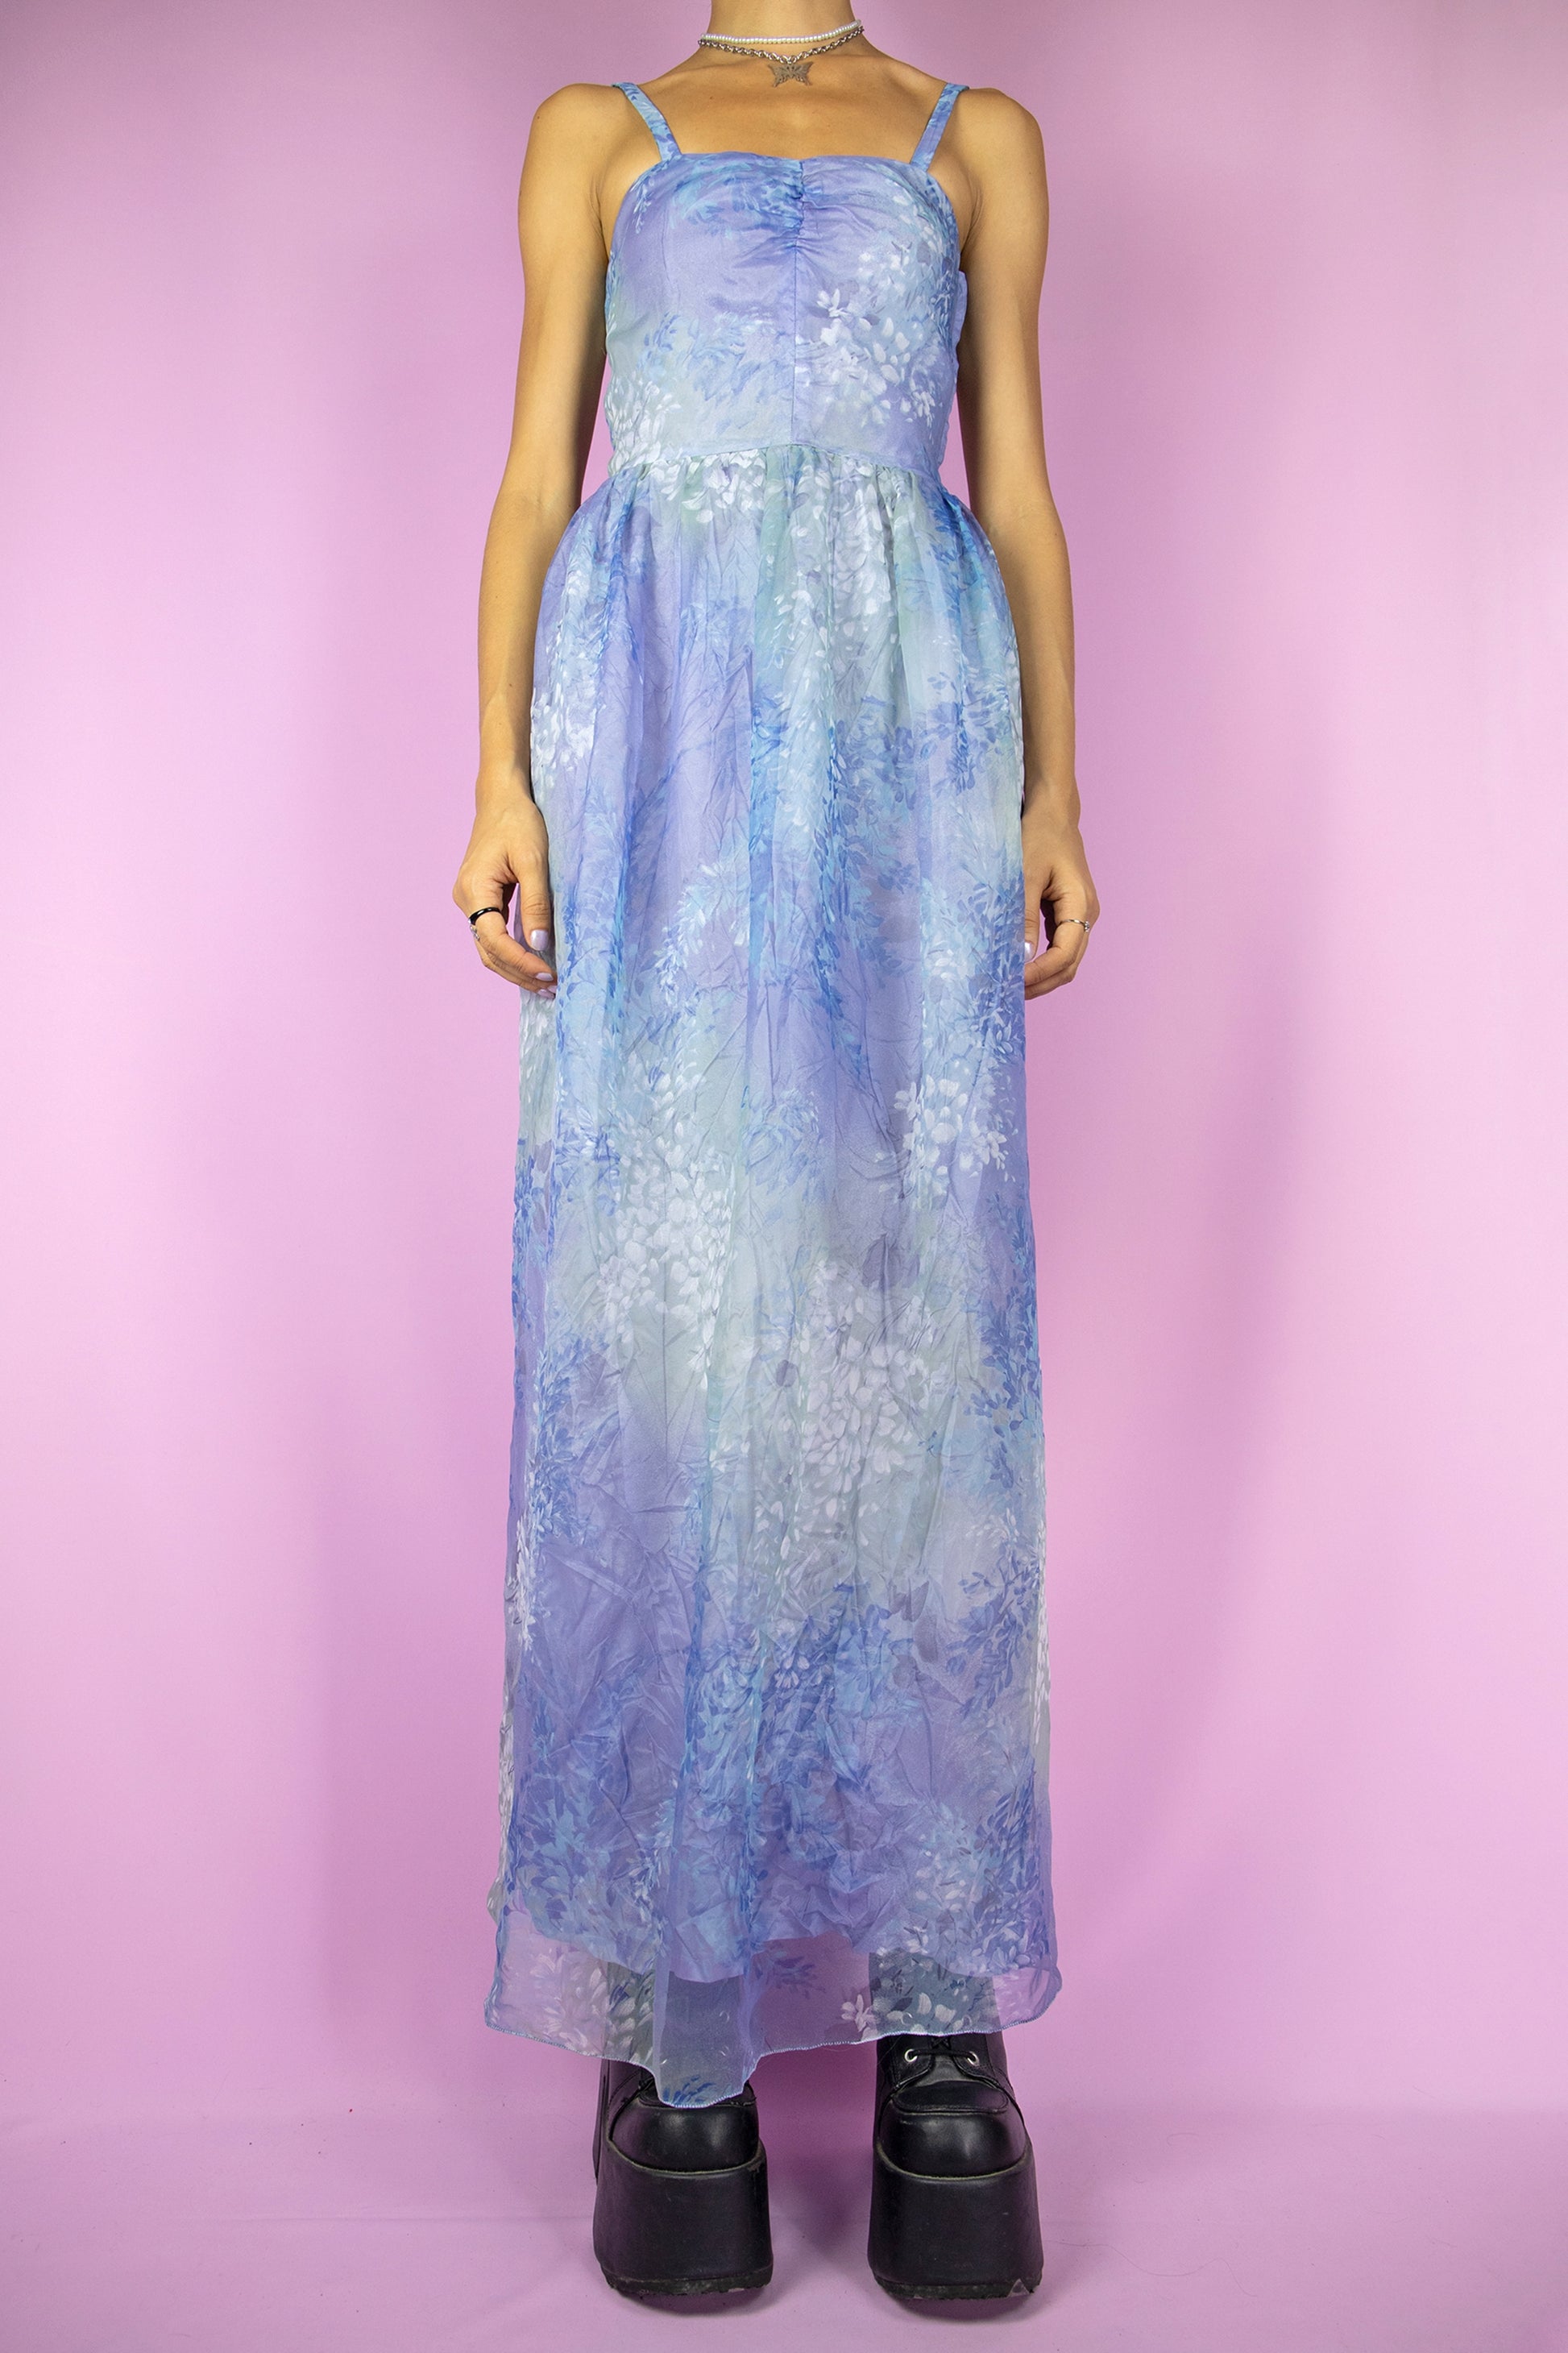 The Vintage 90s Party Floral Maxi Dress is a blue and lilac semi-sheer midi dress with ruched front, and a side zipper closure. Romantic 1990s evening cocktail party elegant summer maxi dress.